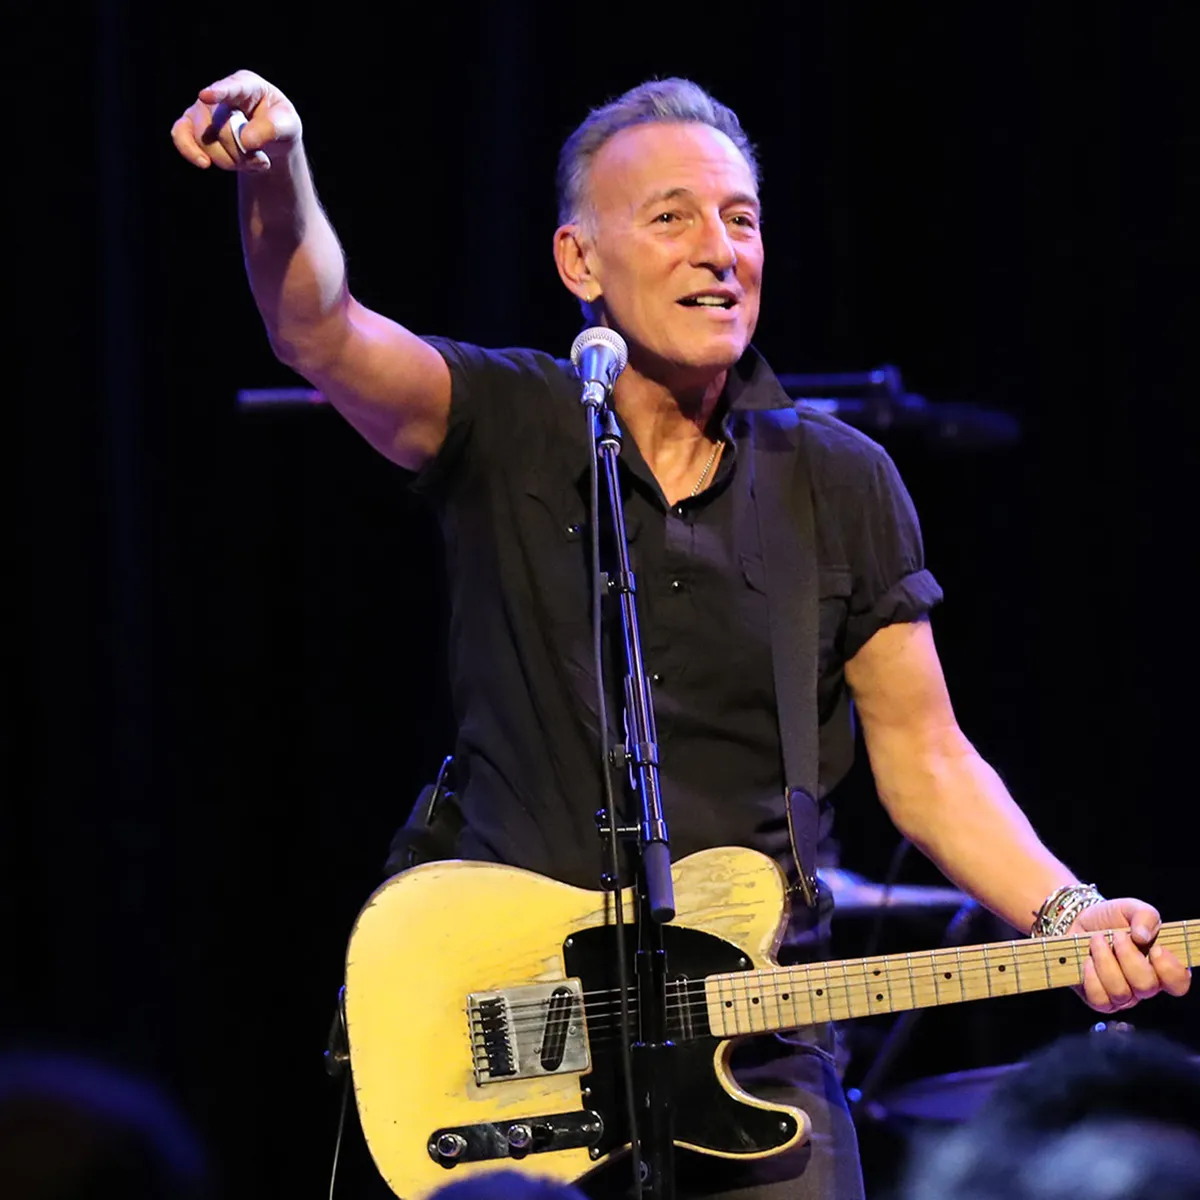 Sony Music Group Announces Acquisition of Bruce Springsteen’s Music Catalogs